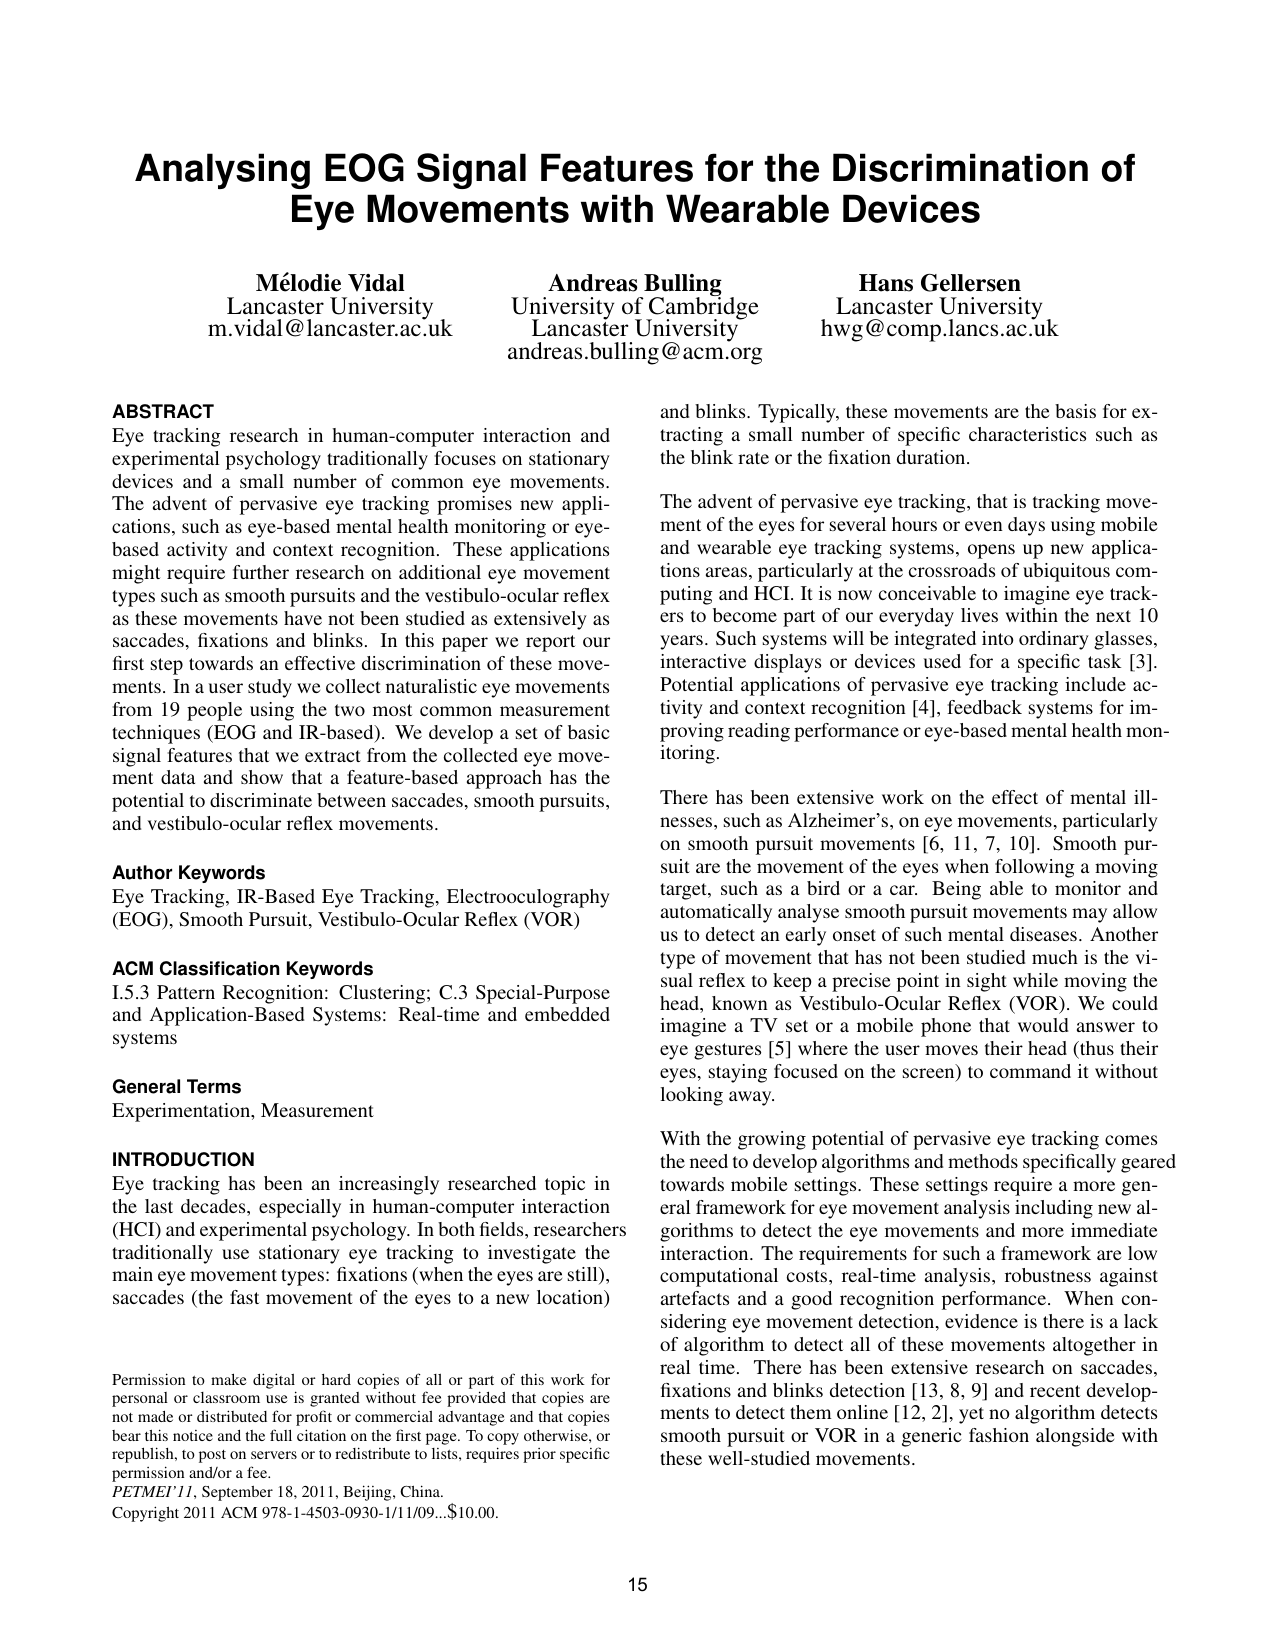 Analysing EOG Signal Features for the Discrimination of Eye Movements with Wearable Devices